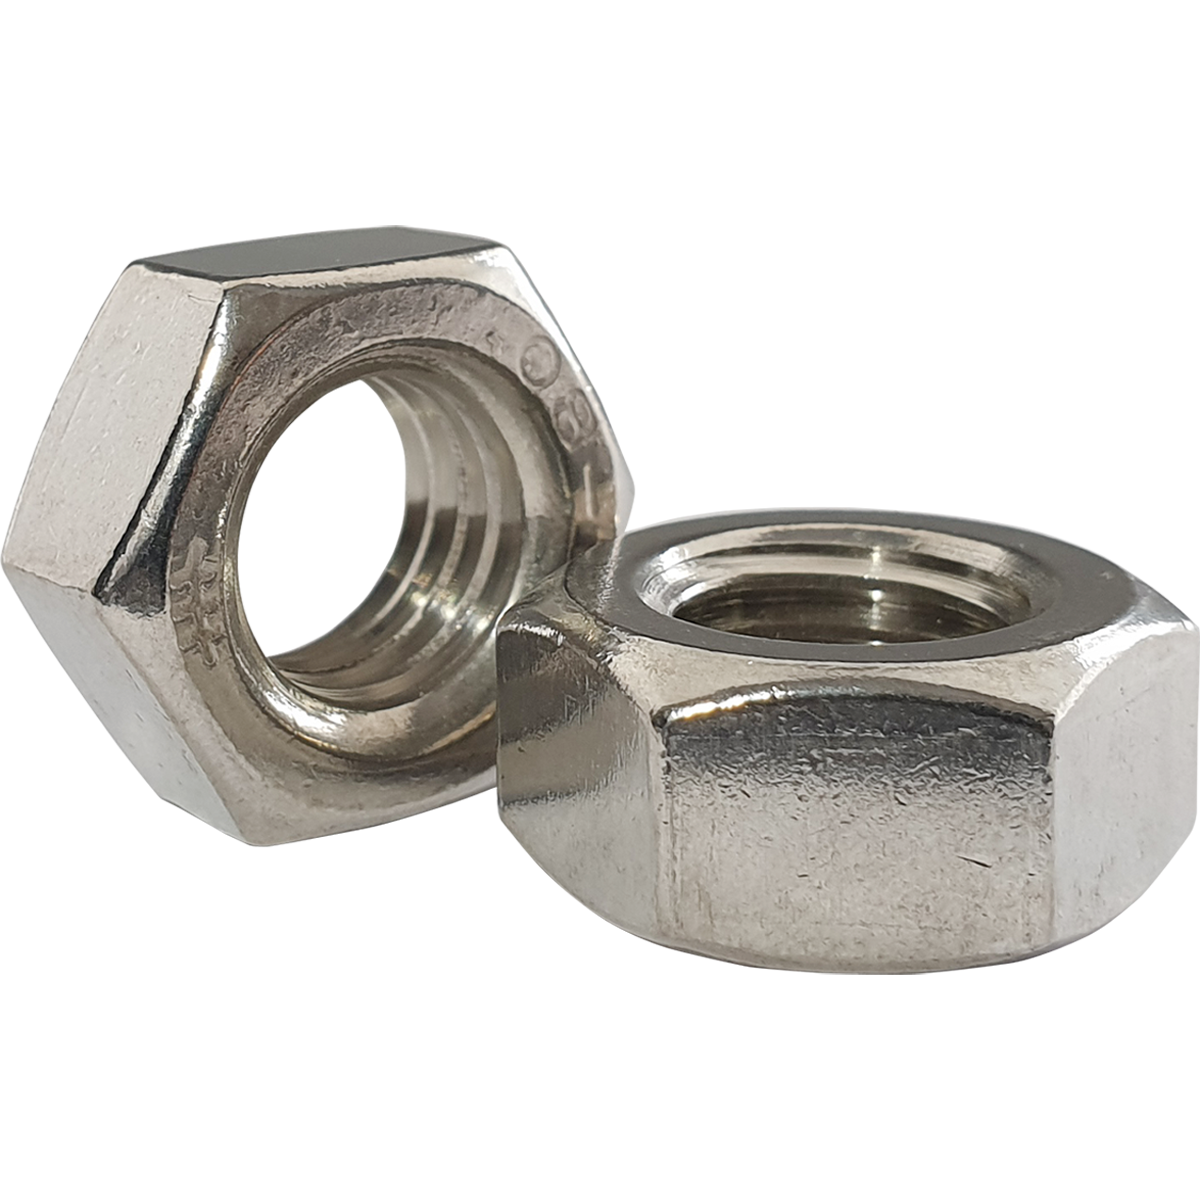 A4 stainless steel hex nuts, also known as hex nuts, or hexagon nuts are at great prices with discounts available across the range here at Fusion Fixings.